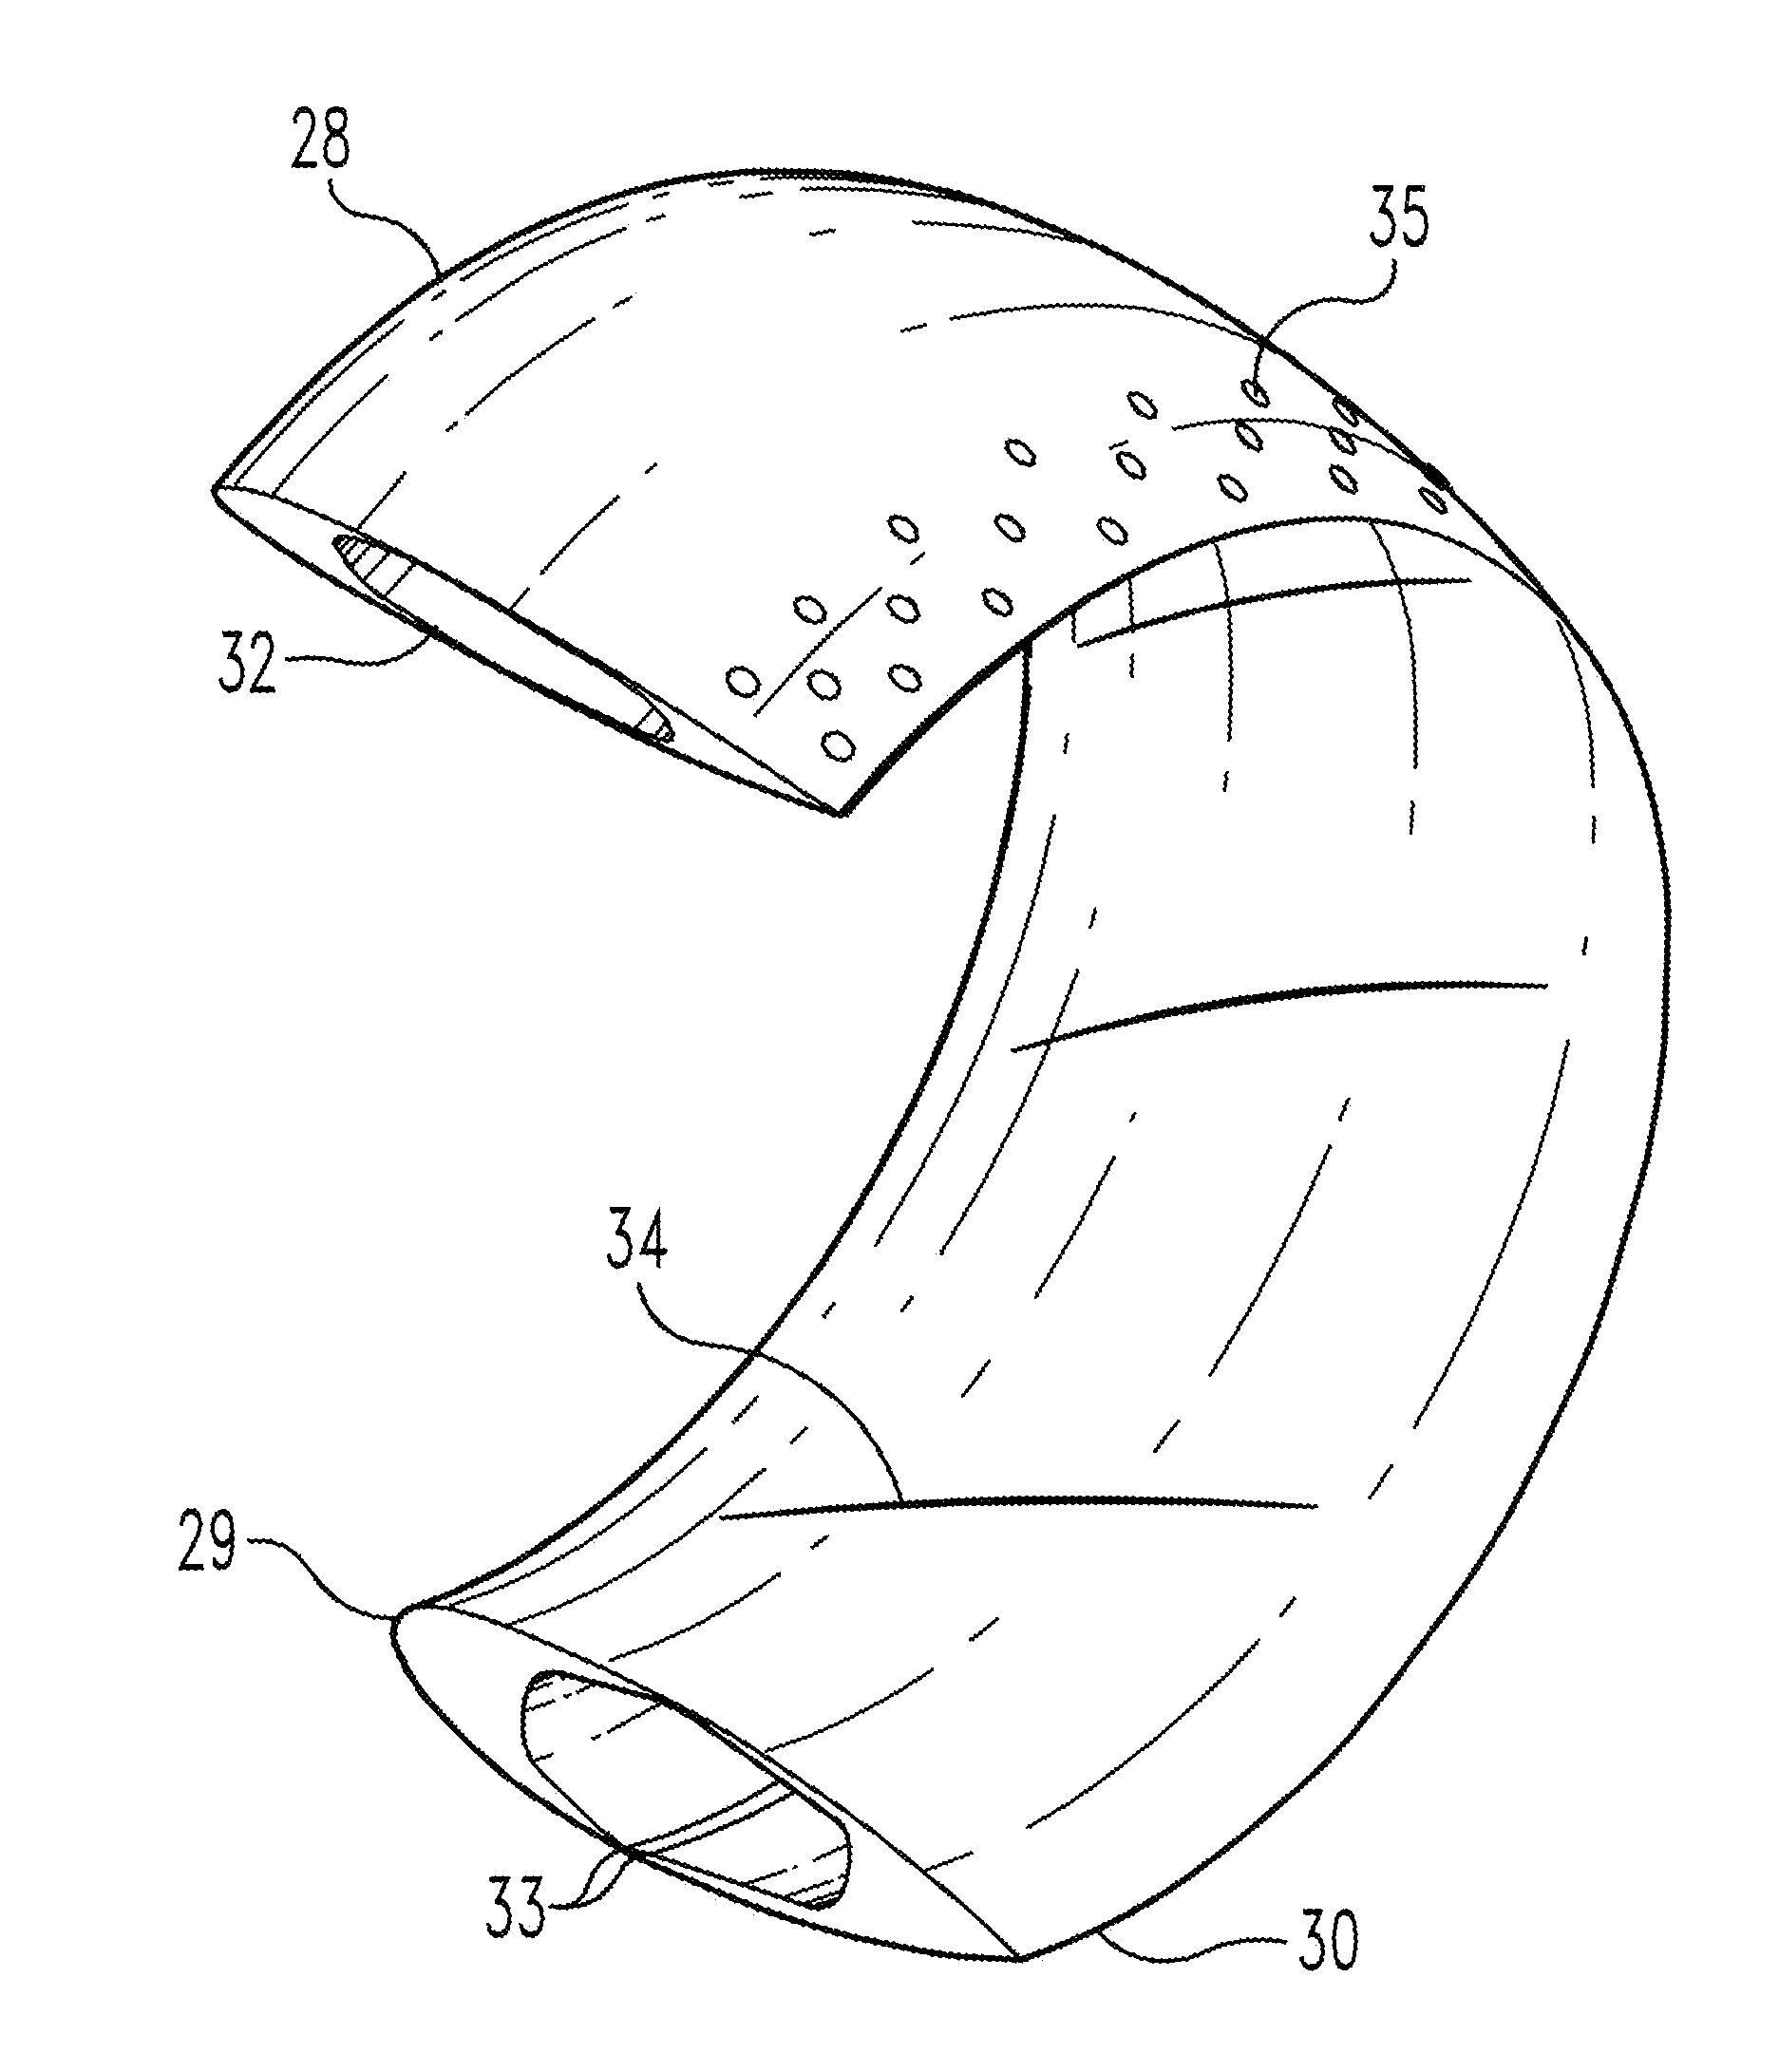 Ring airfoil glider expendable cartridge and glider launching method